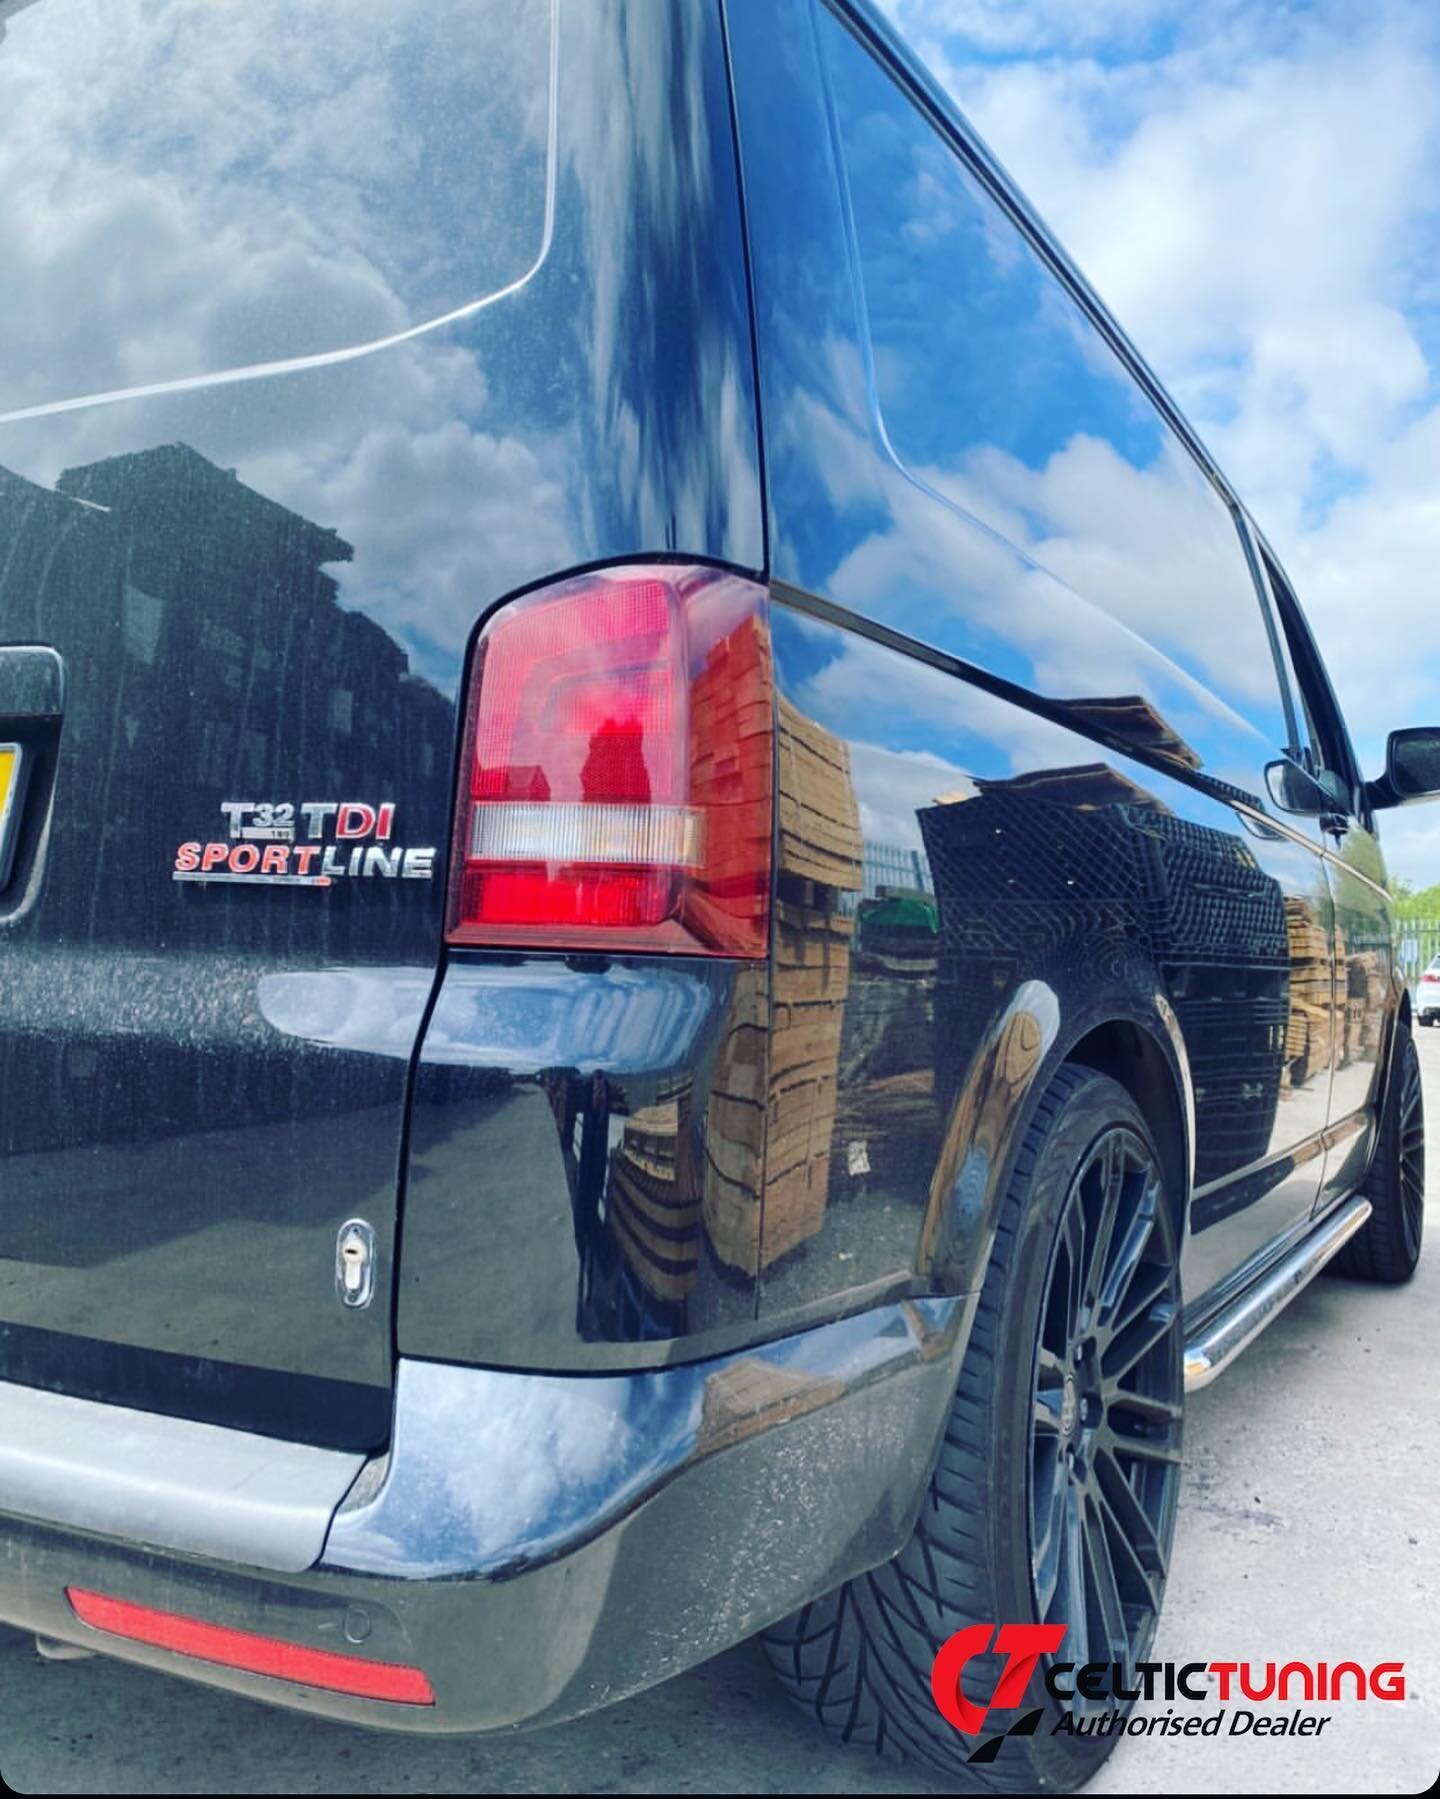 ⁣
⁣▫️VW Transporter T5 2014⁣
⁣▫️ECU Bosch EDC17CP20⁣
⁣
⁣
⁣🚗 Stock Figures 180 bhp &amp; 295 lb/ft⁣
⁣🏎 Stage 1 Figures 215 bhp &amp; 340 lb/ft⁣
⁣
⁣
⁣📈 VMAX Removal⁣
⁣
⁣
⁣⬆️ Peaks Gains +35 bhp &amp; +45 lb/ft⁣
⁣
⁣
⁣🌍 Worldwide Reputable Tuning⁣
⁣✅